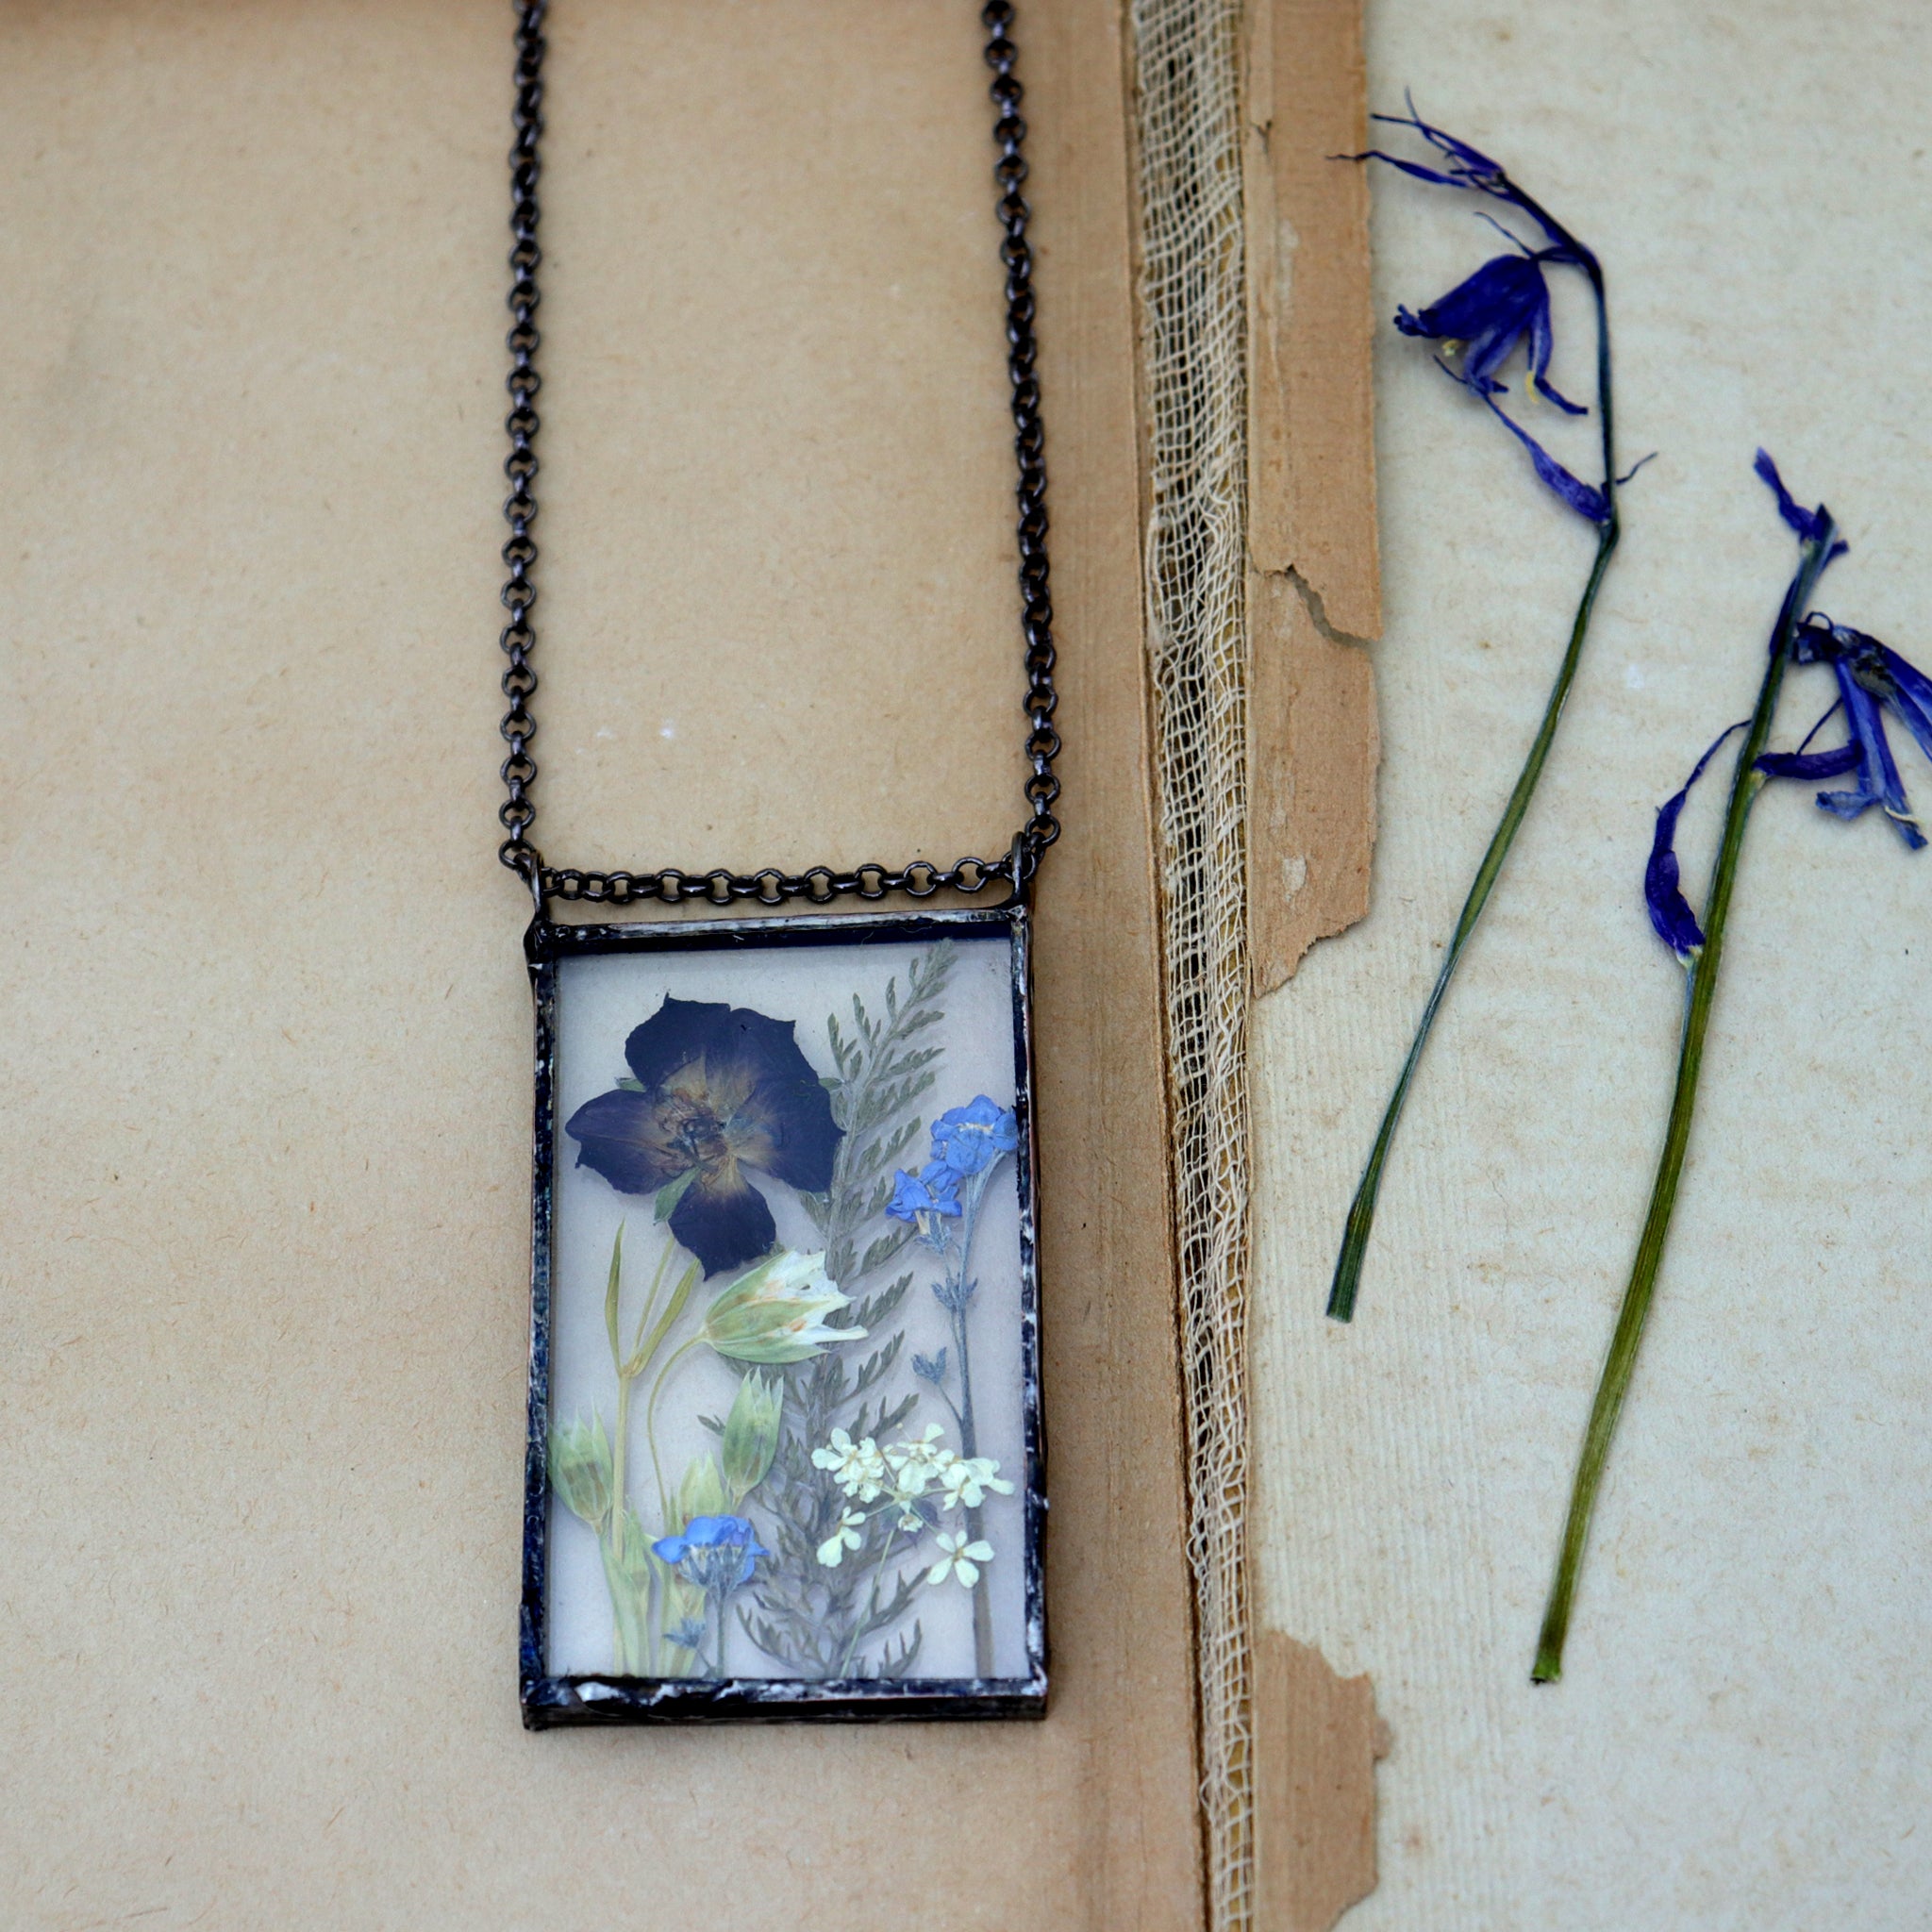  Pressed Meadow flower necklace lying on an old book by some preddes bluebells